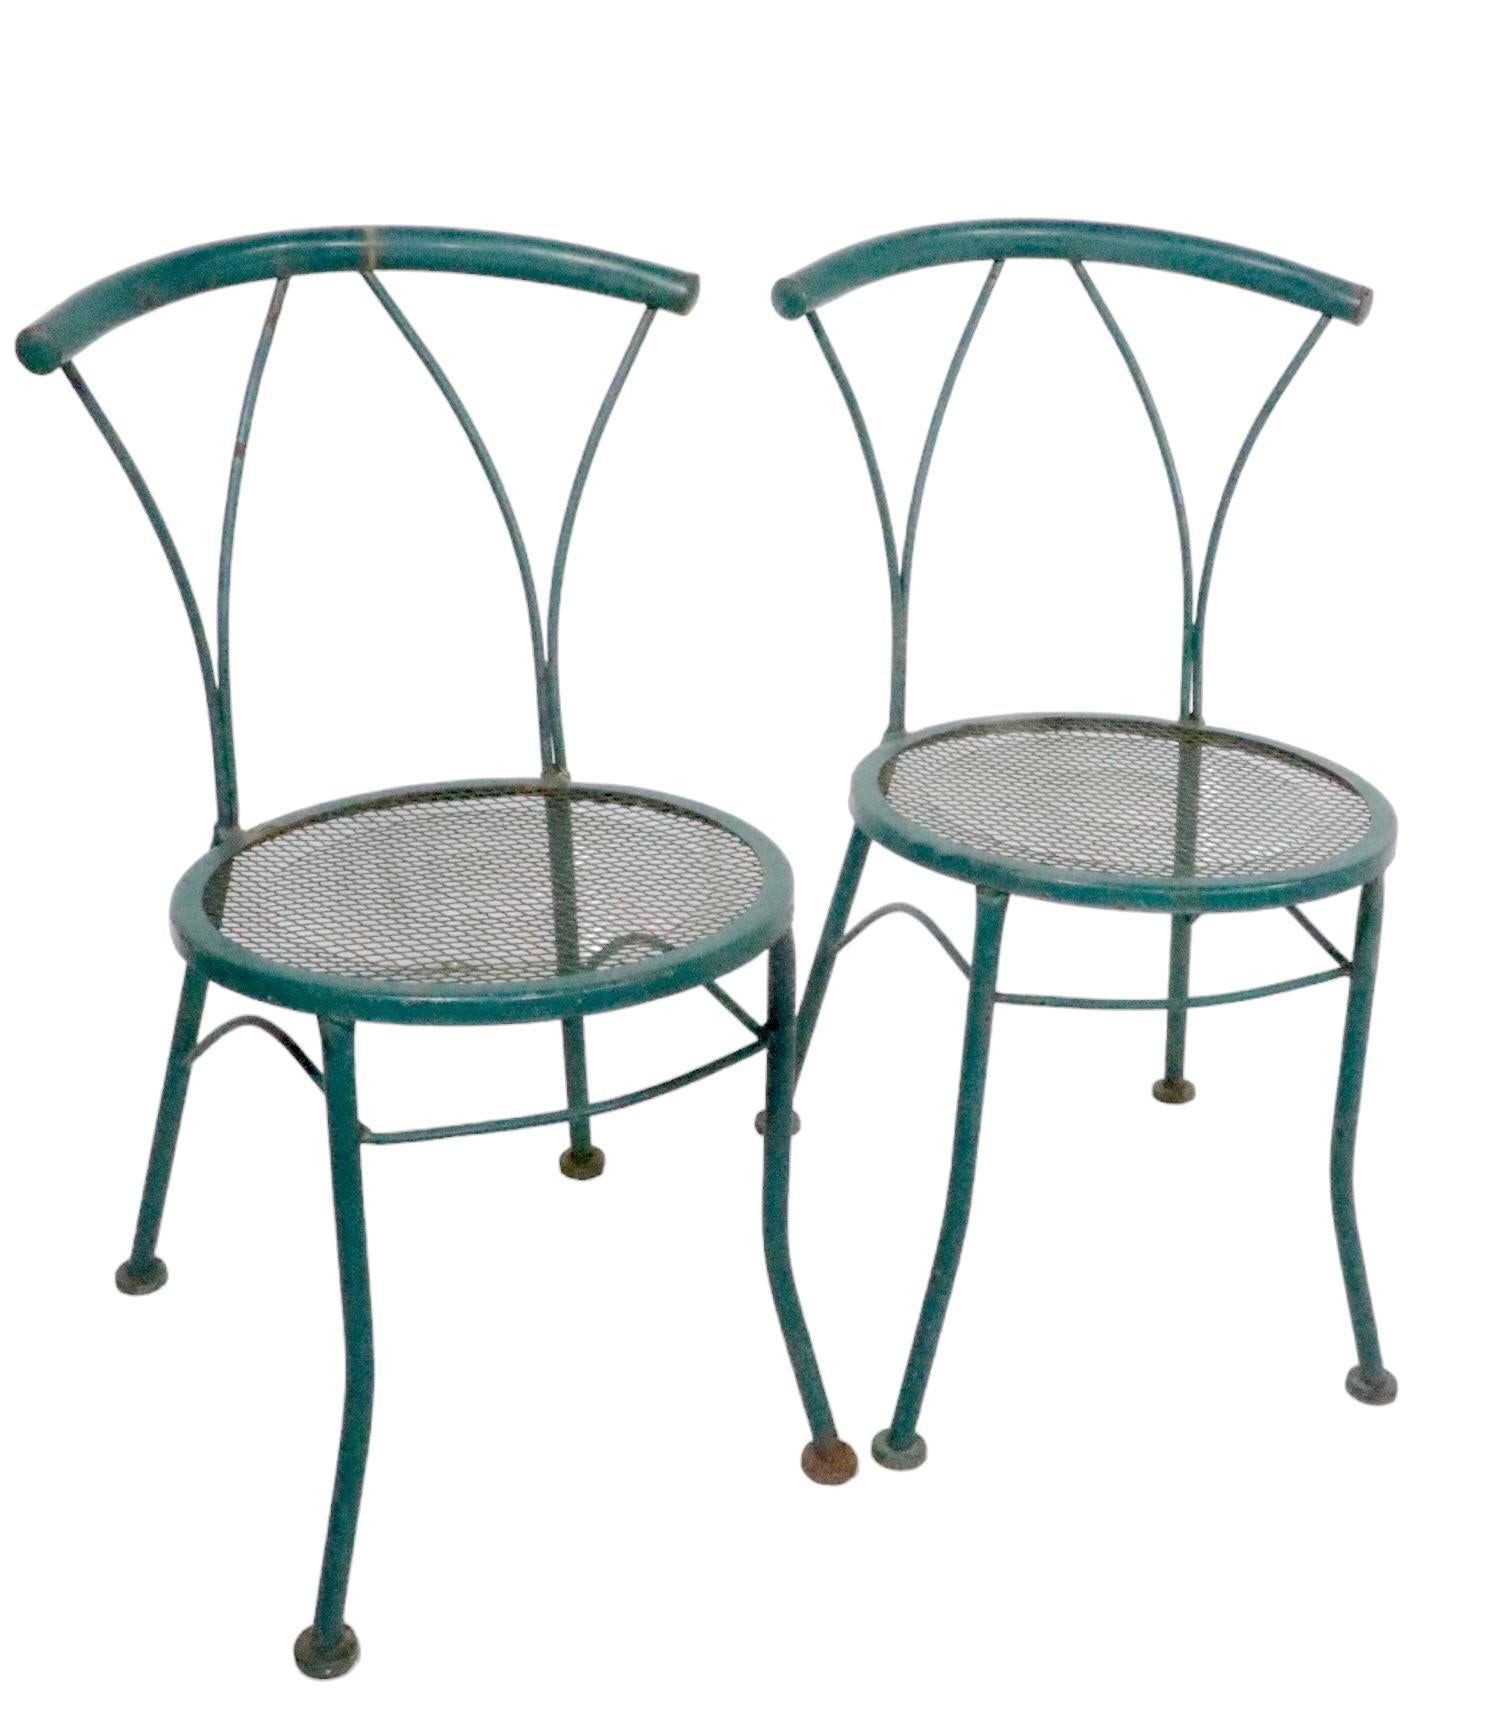 Pr. Wrought Iron and Metal Mesh Garden Patio Poolside Bistro Cafe  Dining Chairs For Sale 1